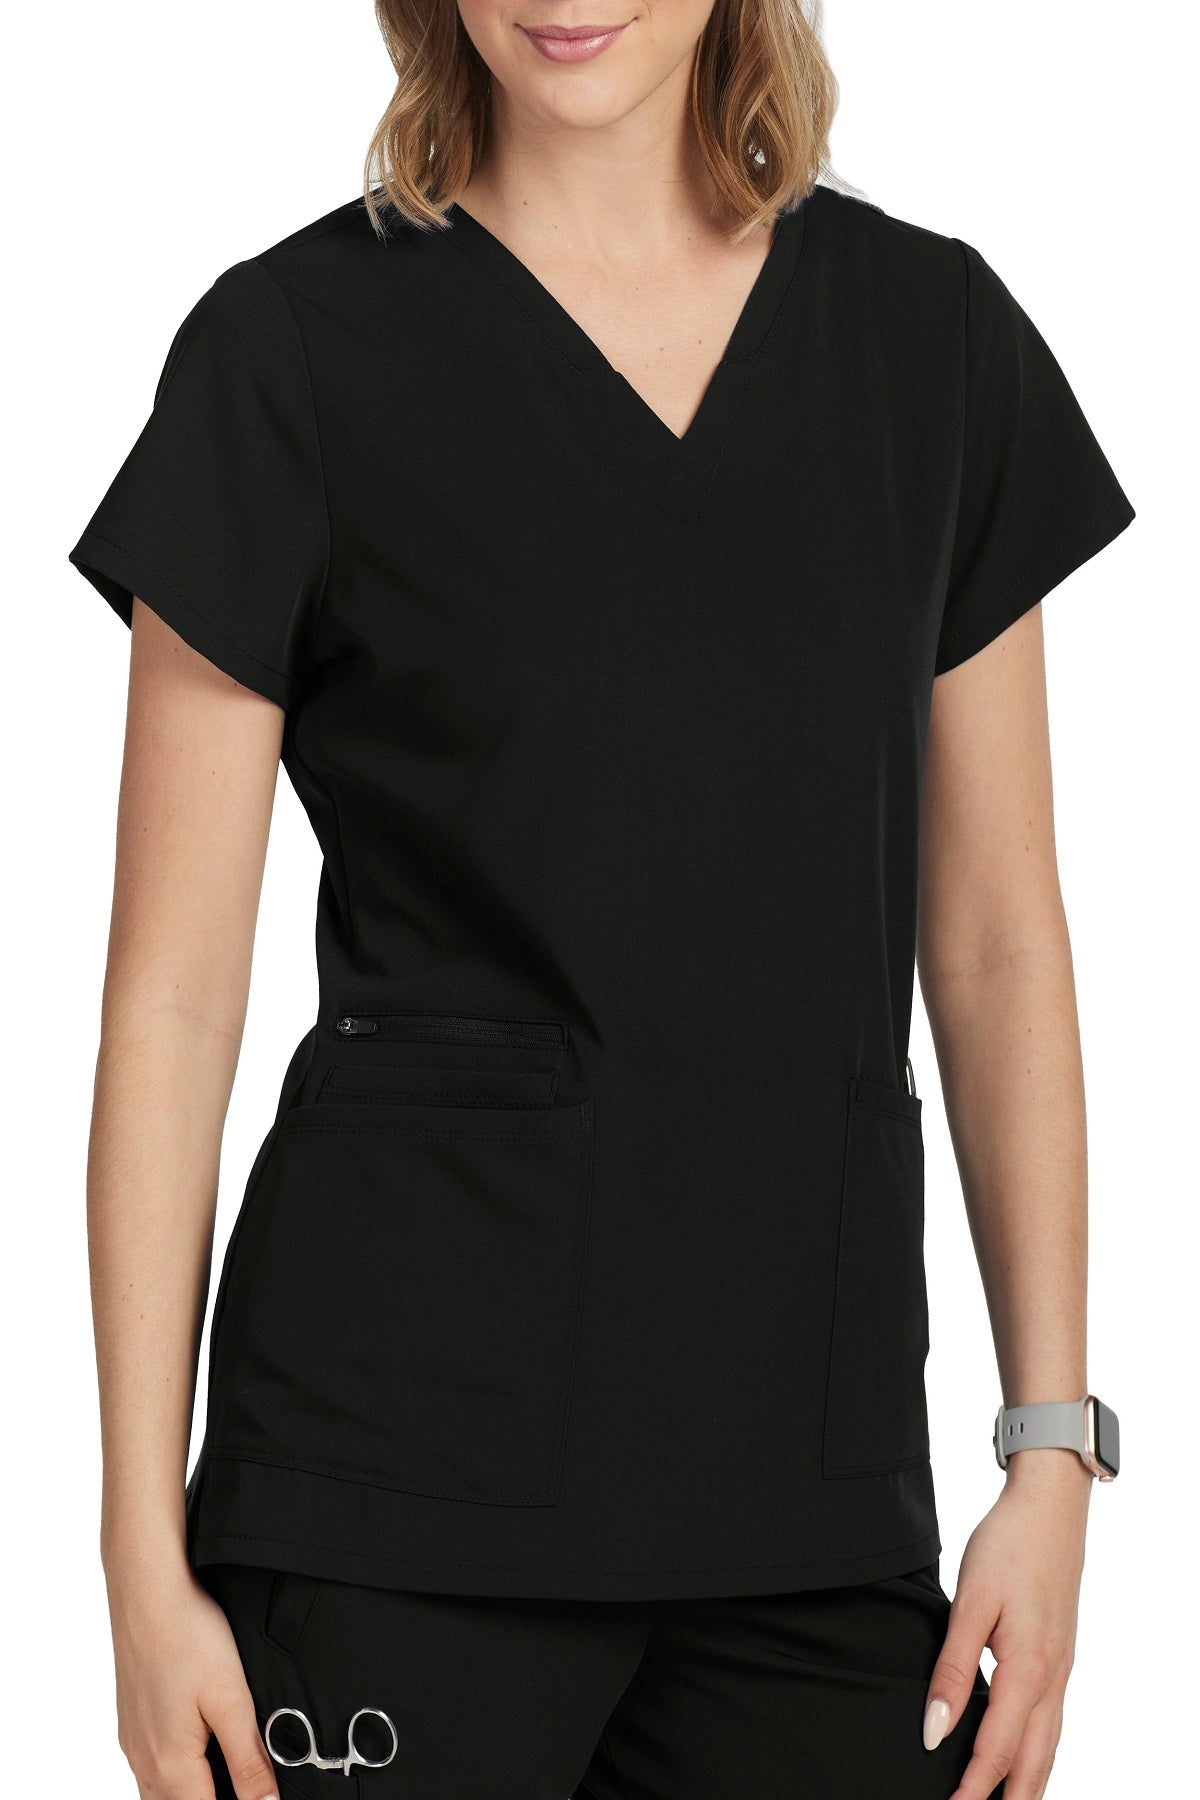 Barco Unify Scrub Top Purpose V-Neck in Black at Parker's Clothing and Shoes.